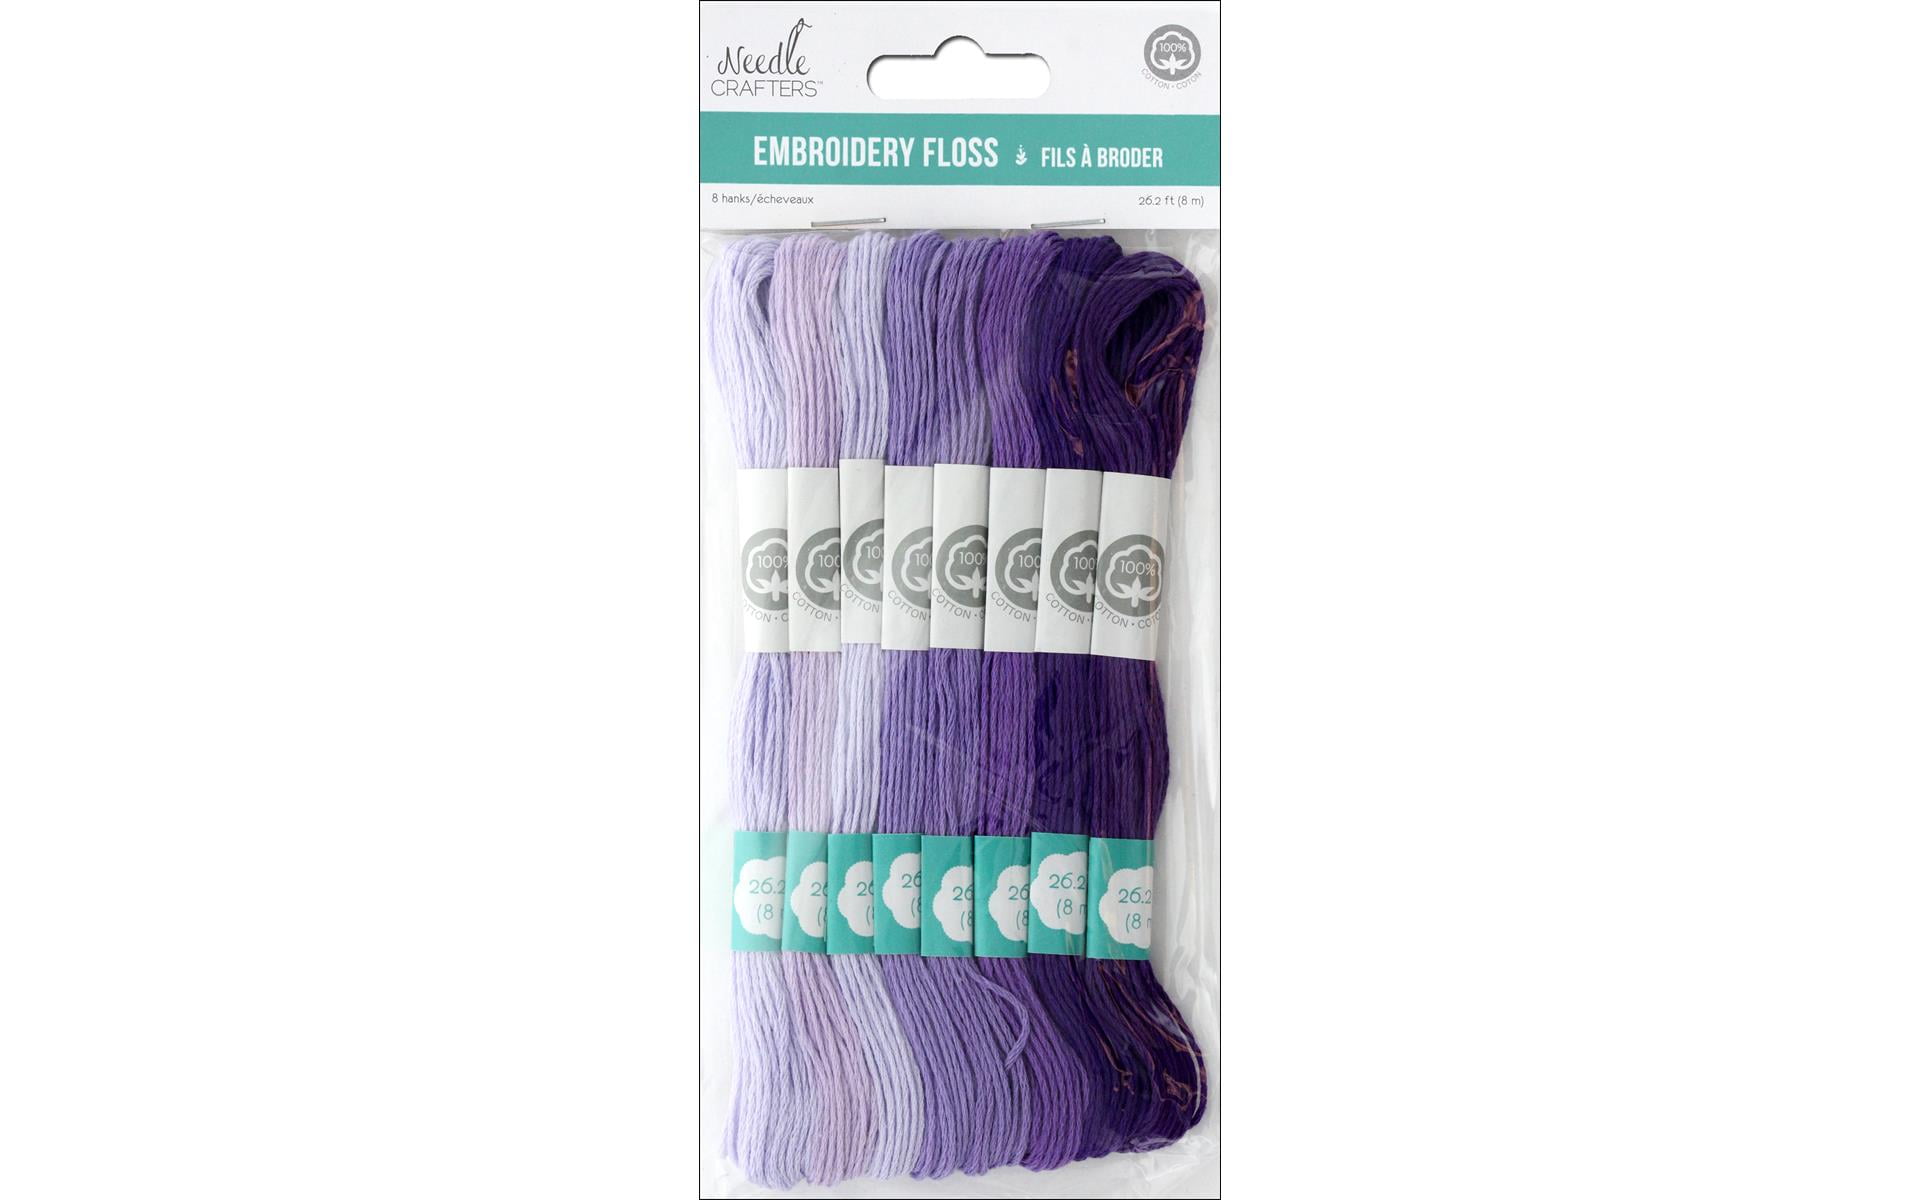 8m Darks Needlecrafters Cotton Embroidery Floss